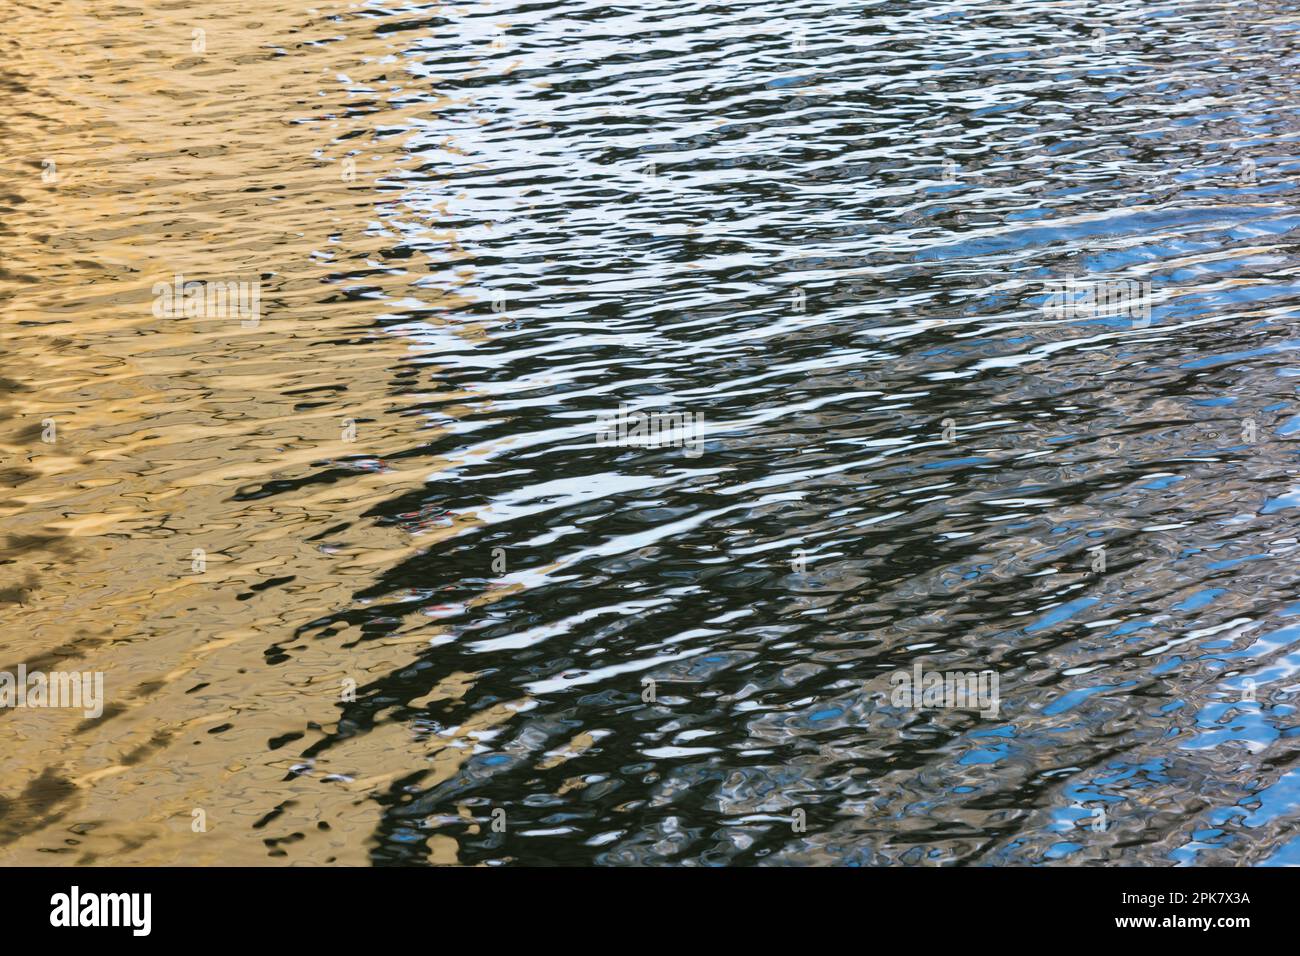 River water surface details, reflections and abstracts, ripples and patterns. Stock Photo